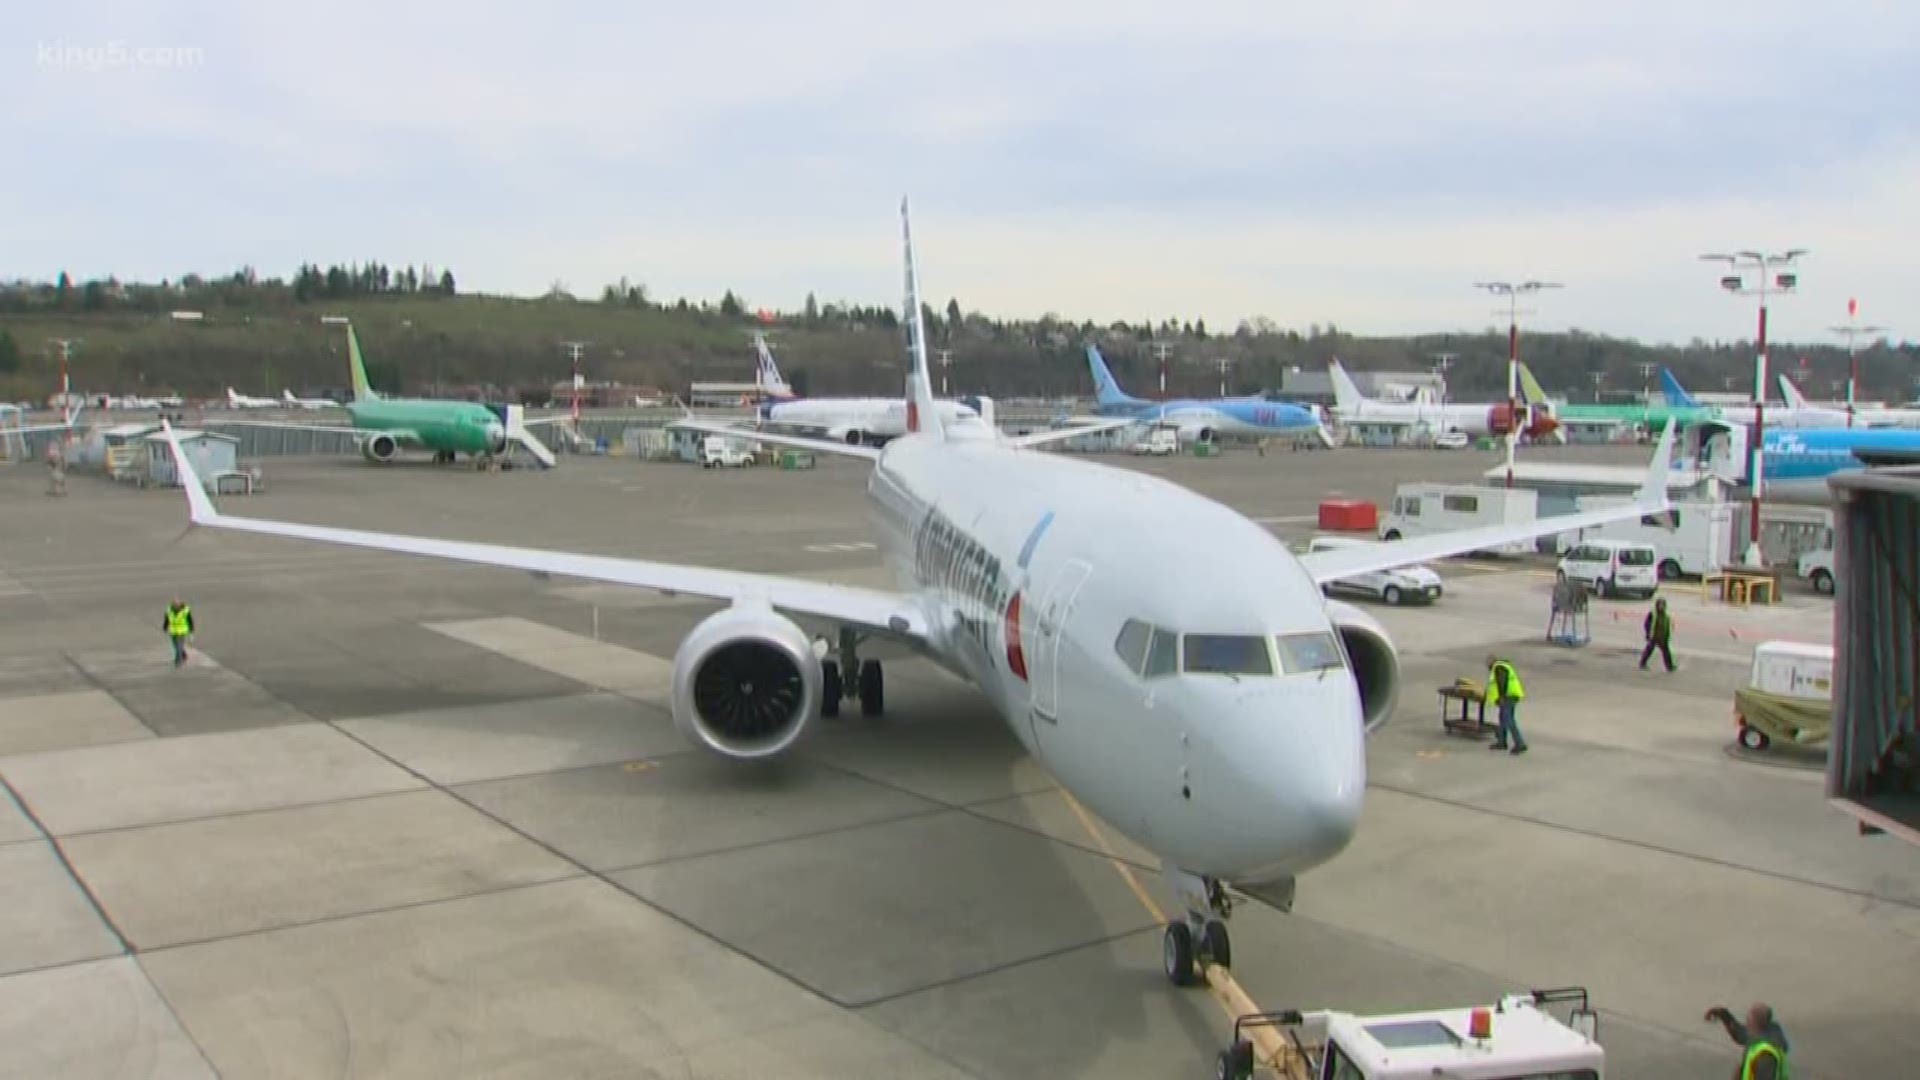 We hear from the CEO of one of the nation's largest airlines that had to pull its MAX's out of service. KING 5's Aviation Specialist Glenn Farley has more.